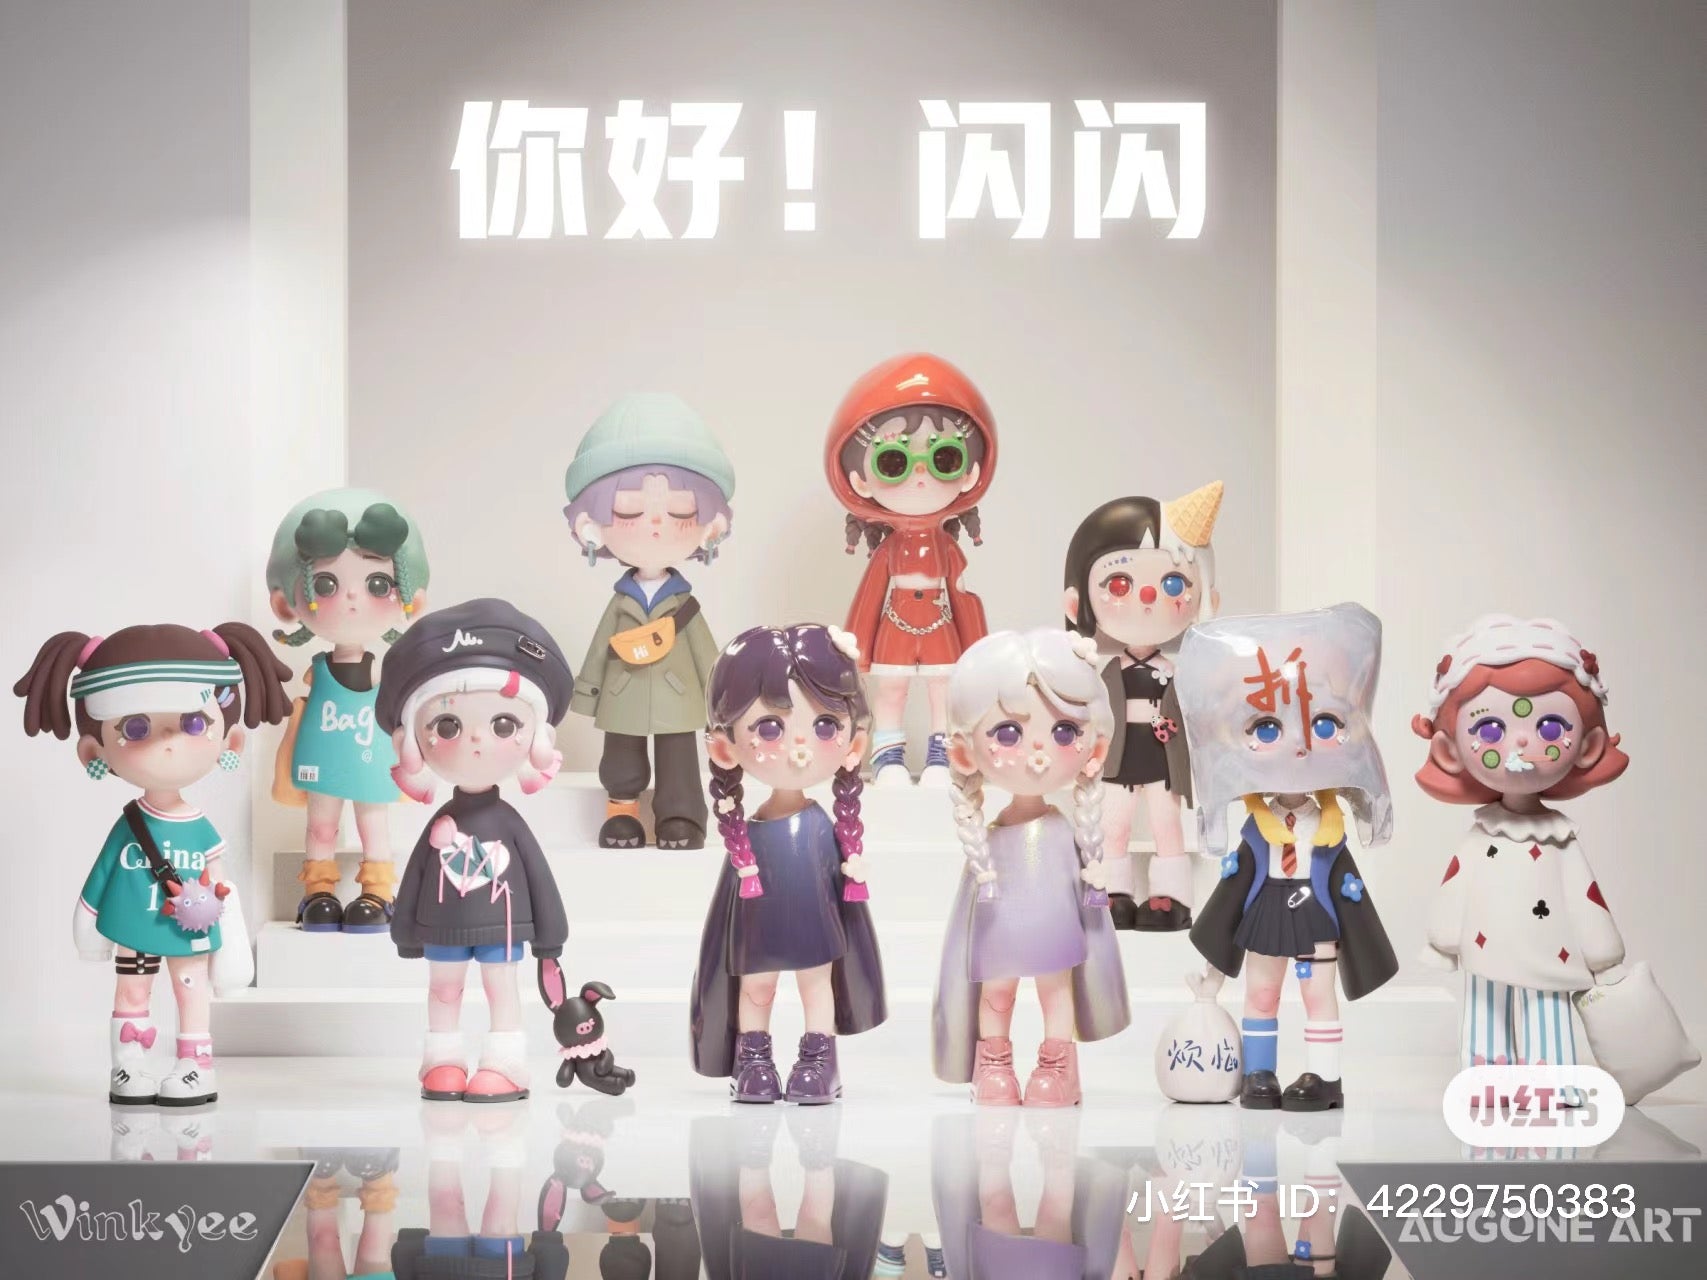 Hello Winkyee! Shining Blind Box Series featuring cartoon doll figurines and exclamation marks, with a girl figurine and toy dolls visible.